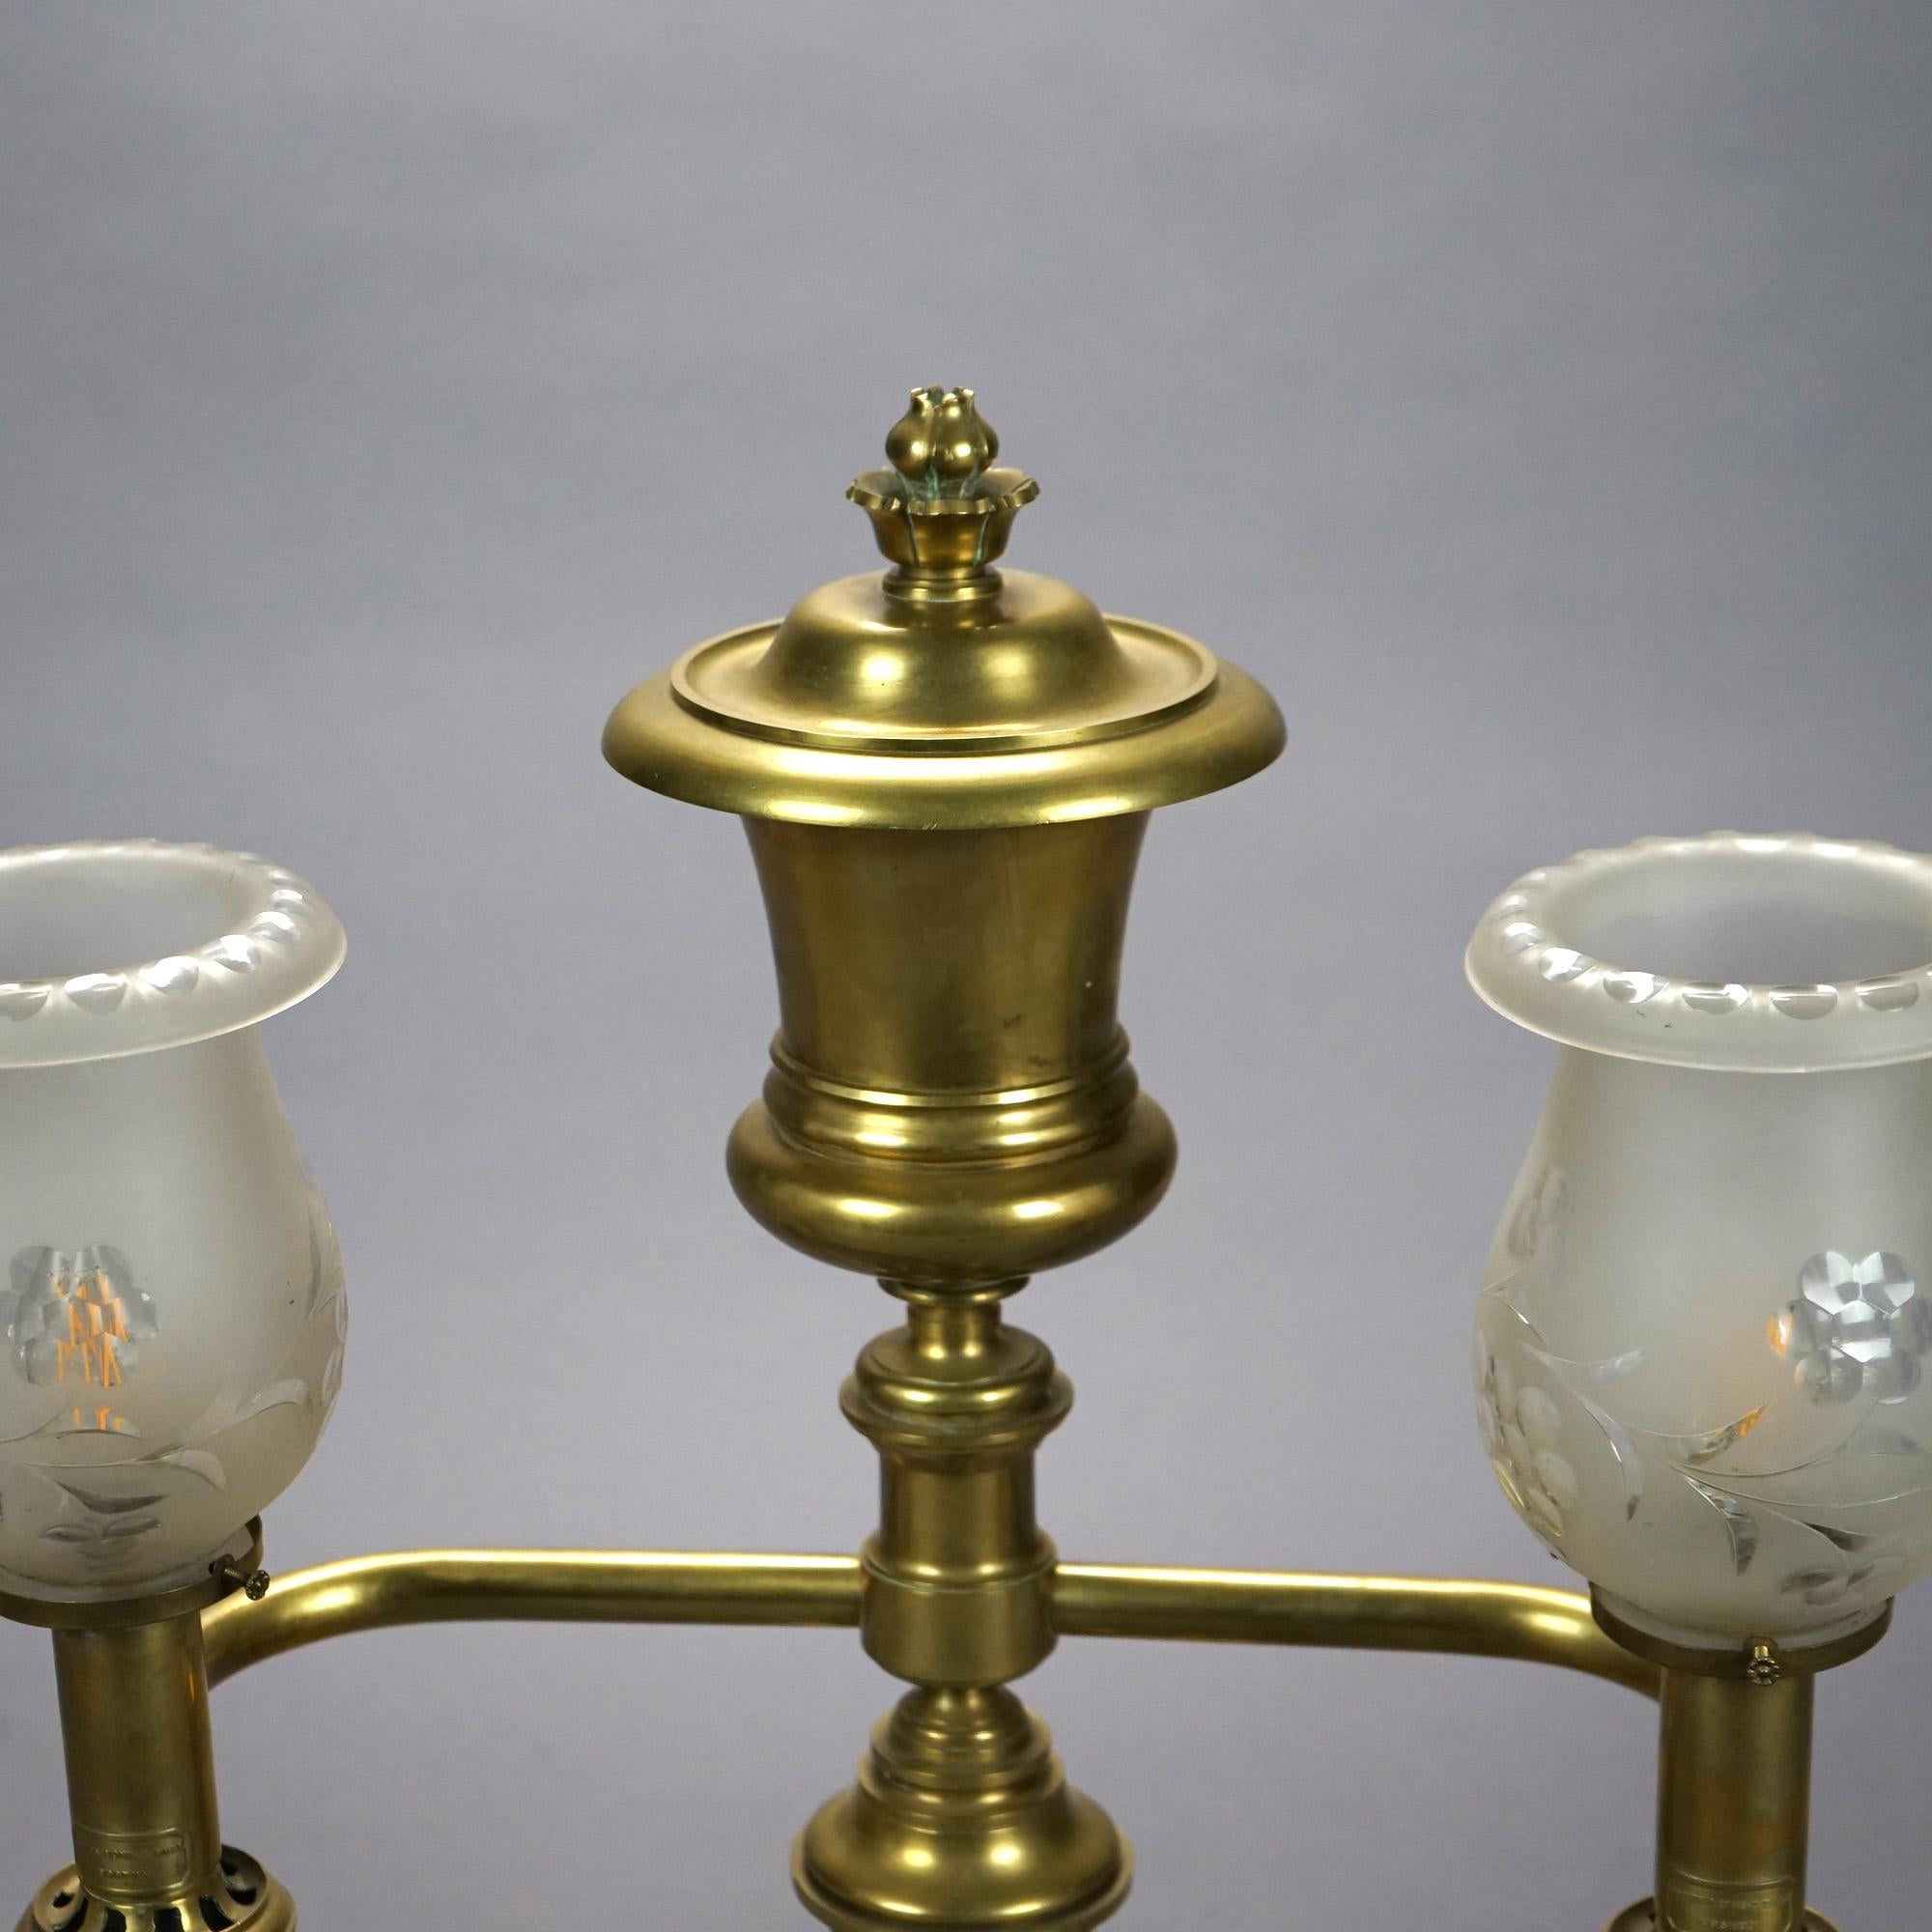 19th Century Antique Gilt Brass & Bronze Double Argand Lamp with Shades, circa 1820 For Sale